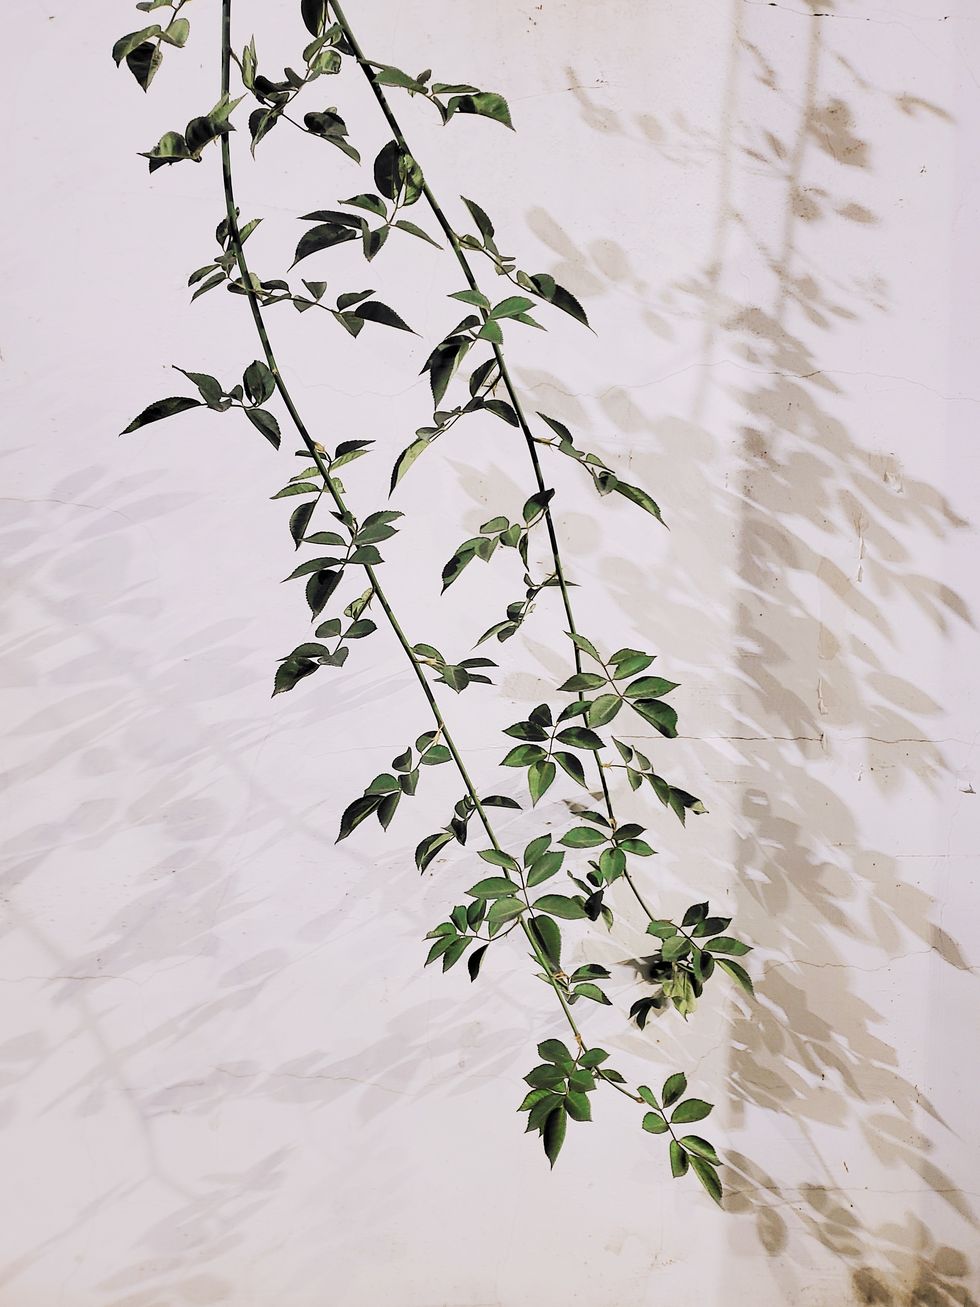 abstract pattern of plant branches hanging on the wall and its shadow on the wall at night